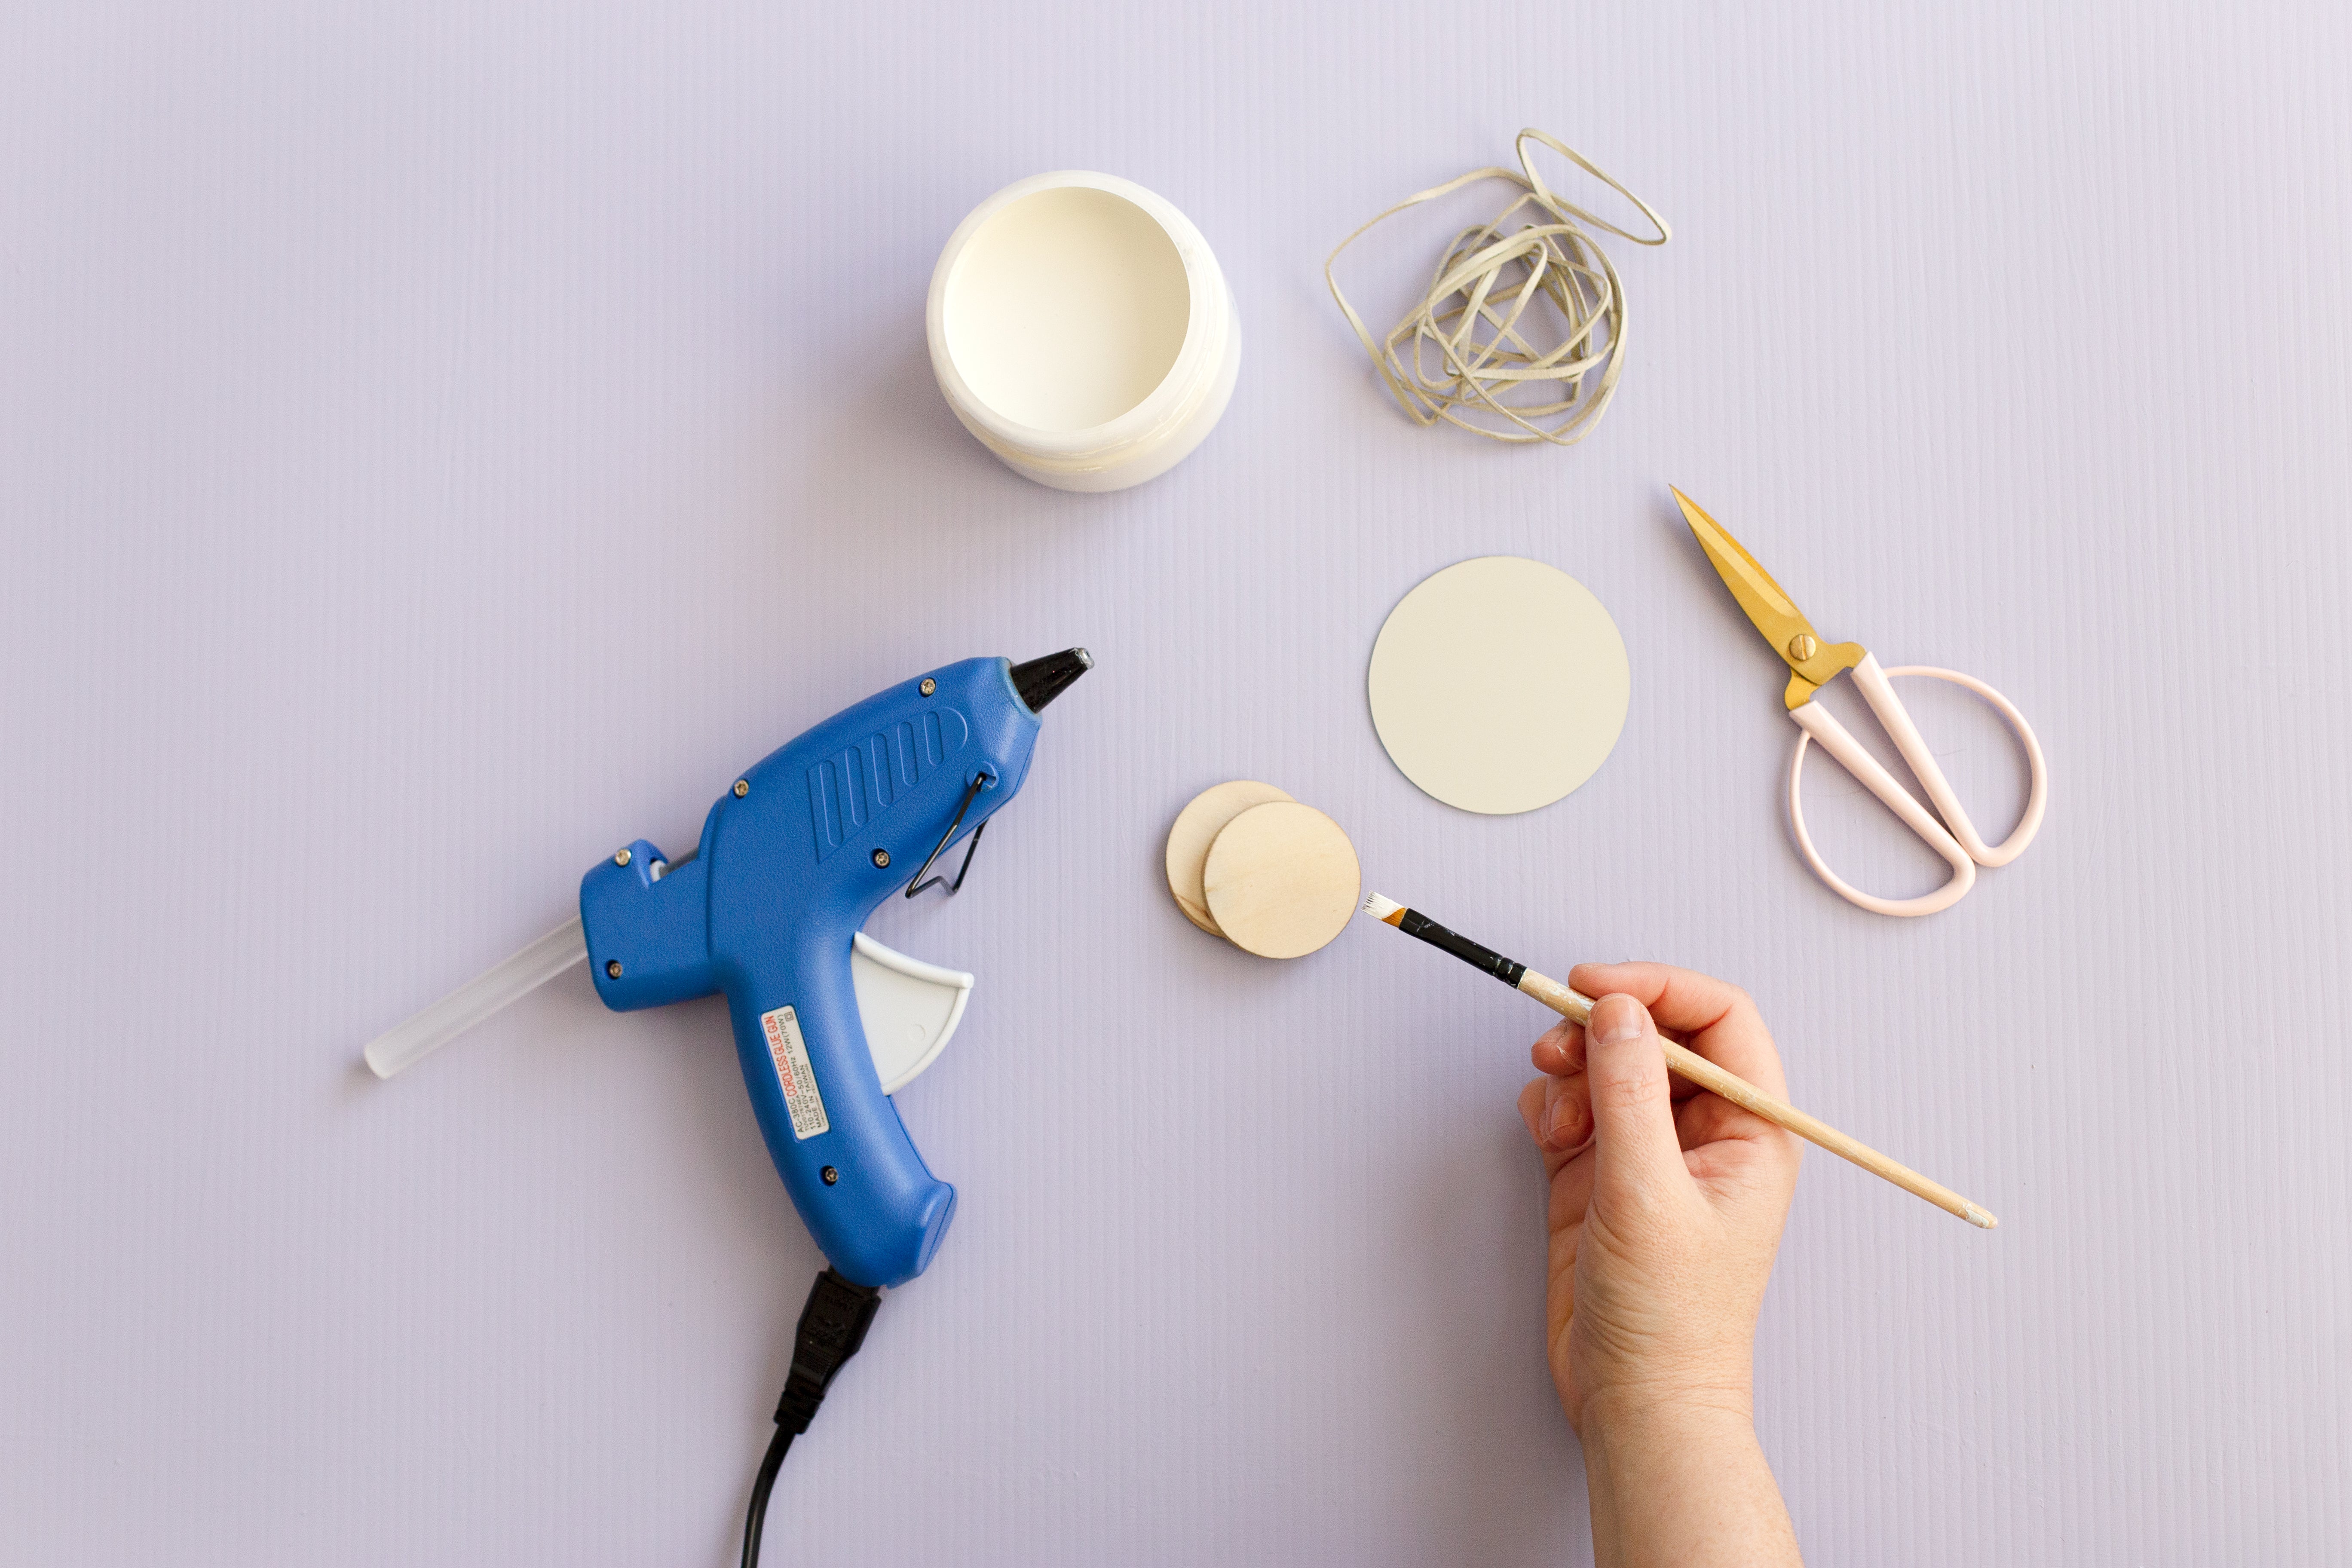 A blue hot glue gun, a pot of white paint, some faux leather string, a pair of pink and gold scissors, a round mirror and some smaller round wooden discs, all flatlayed on a pale lilac background. There's a hand holding a small paintbrush that that has been dipped in the white paint.